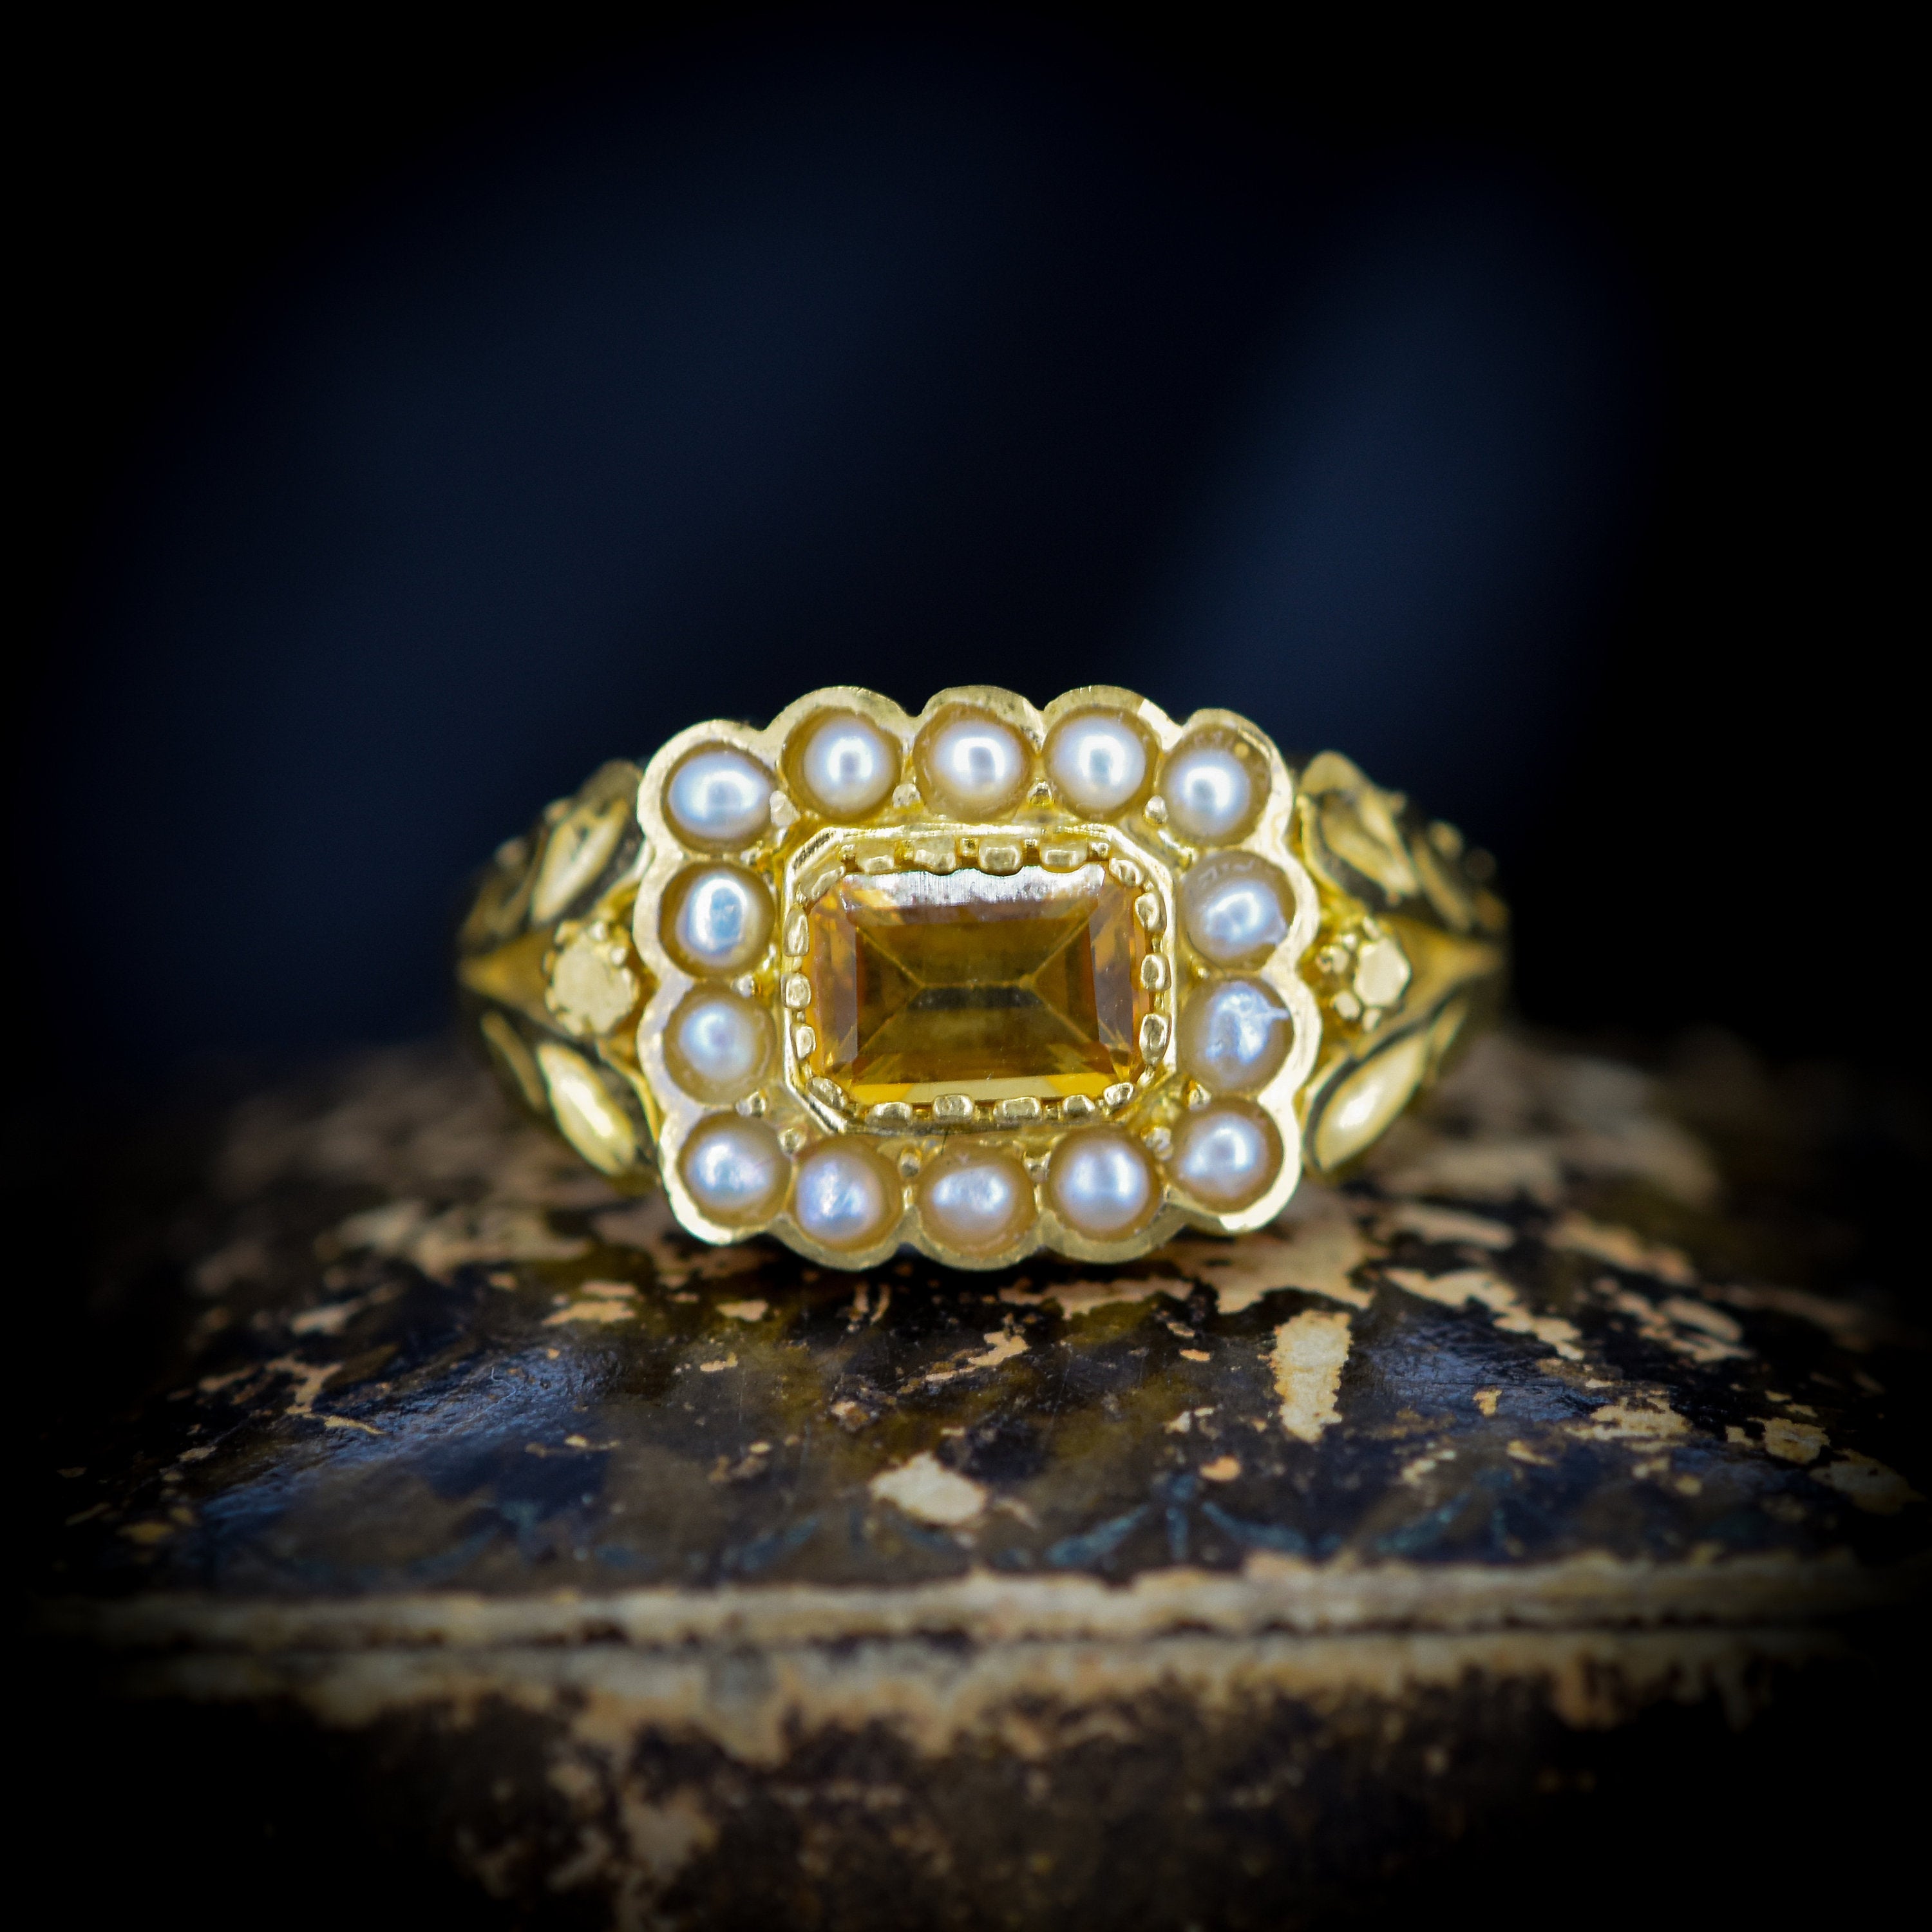 Welwyn Ring. Circa 1820 - Antique Topaz and Pearl Ring